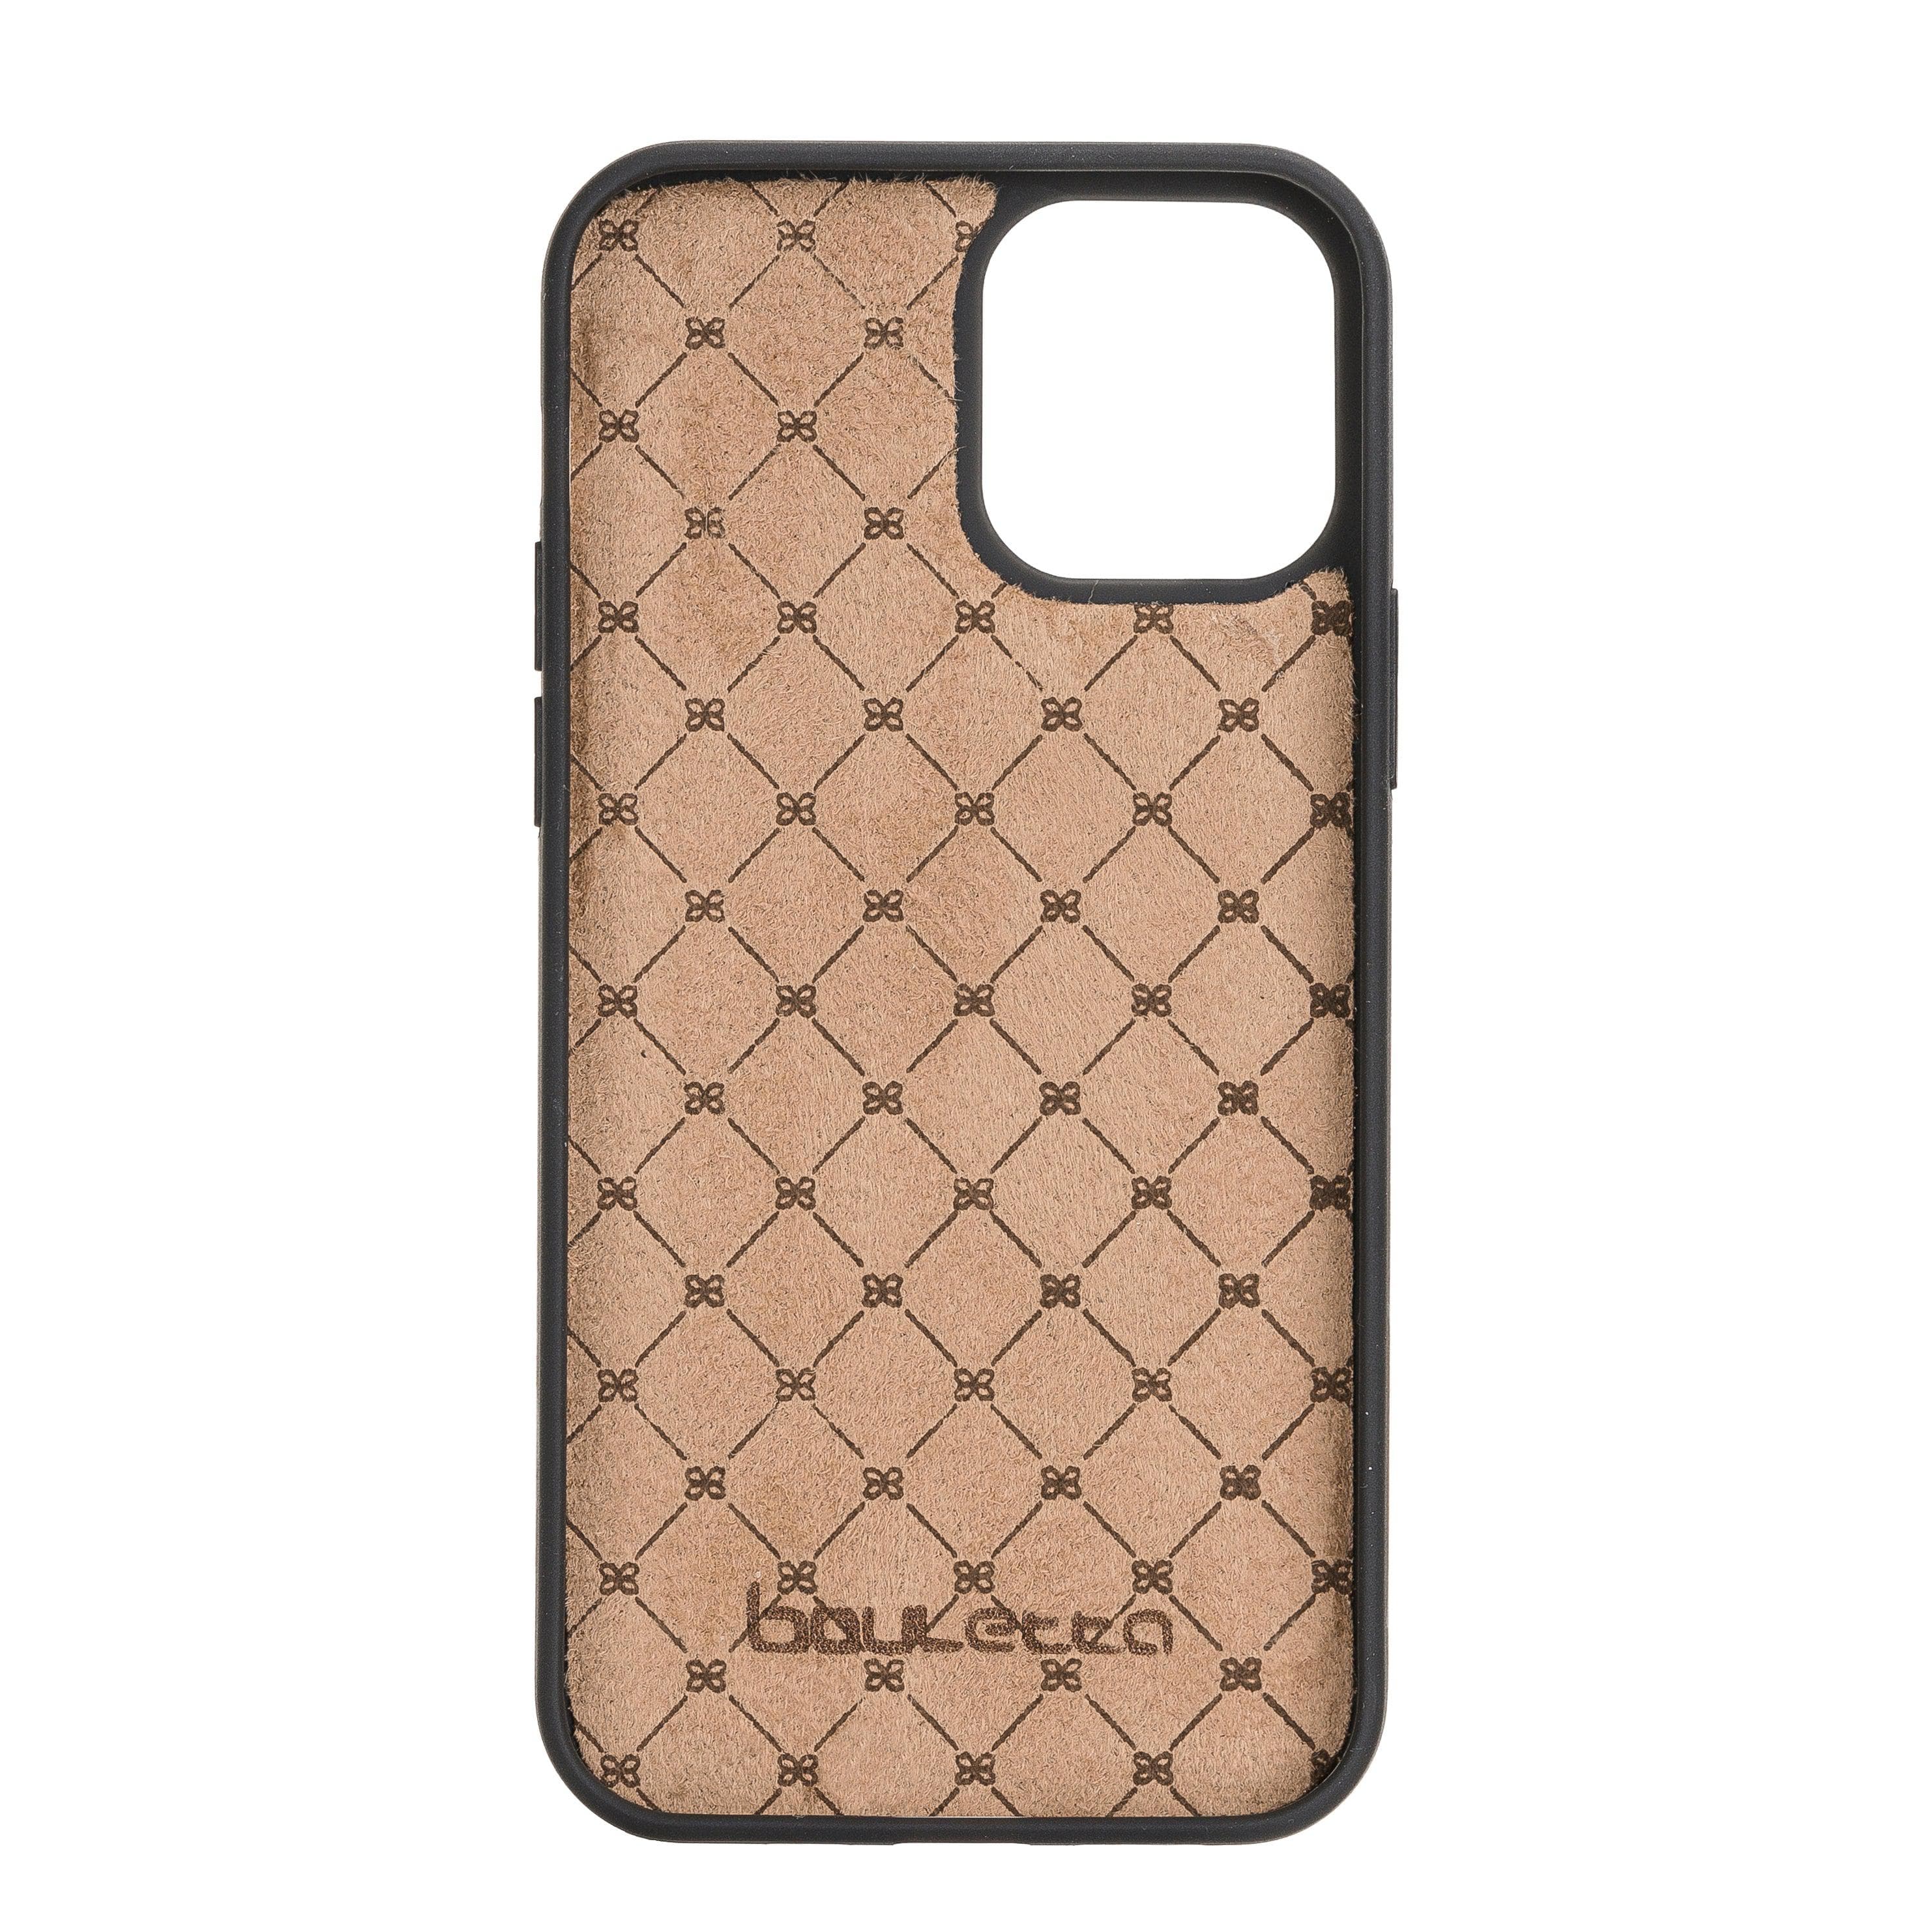 Louis Vuitton iPhone Wallet Phone Bags For iPhone 12 11